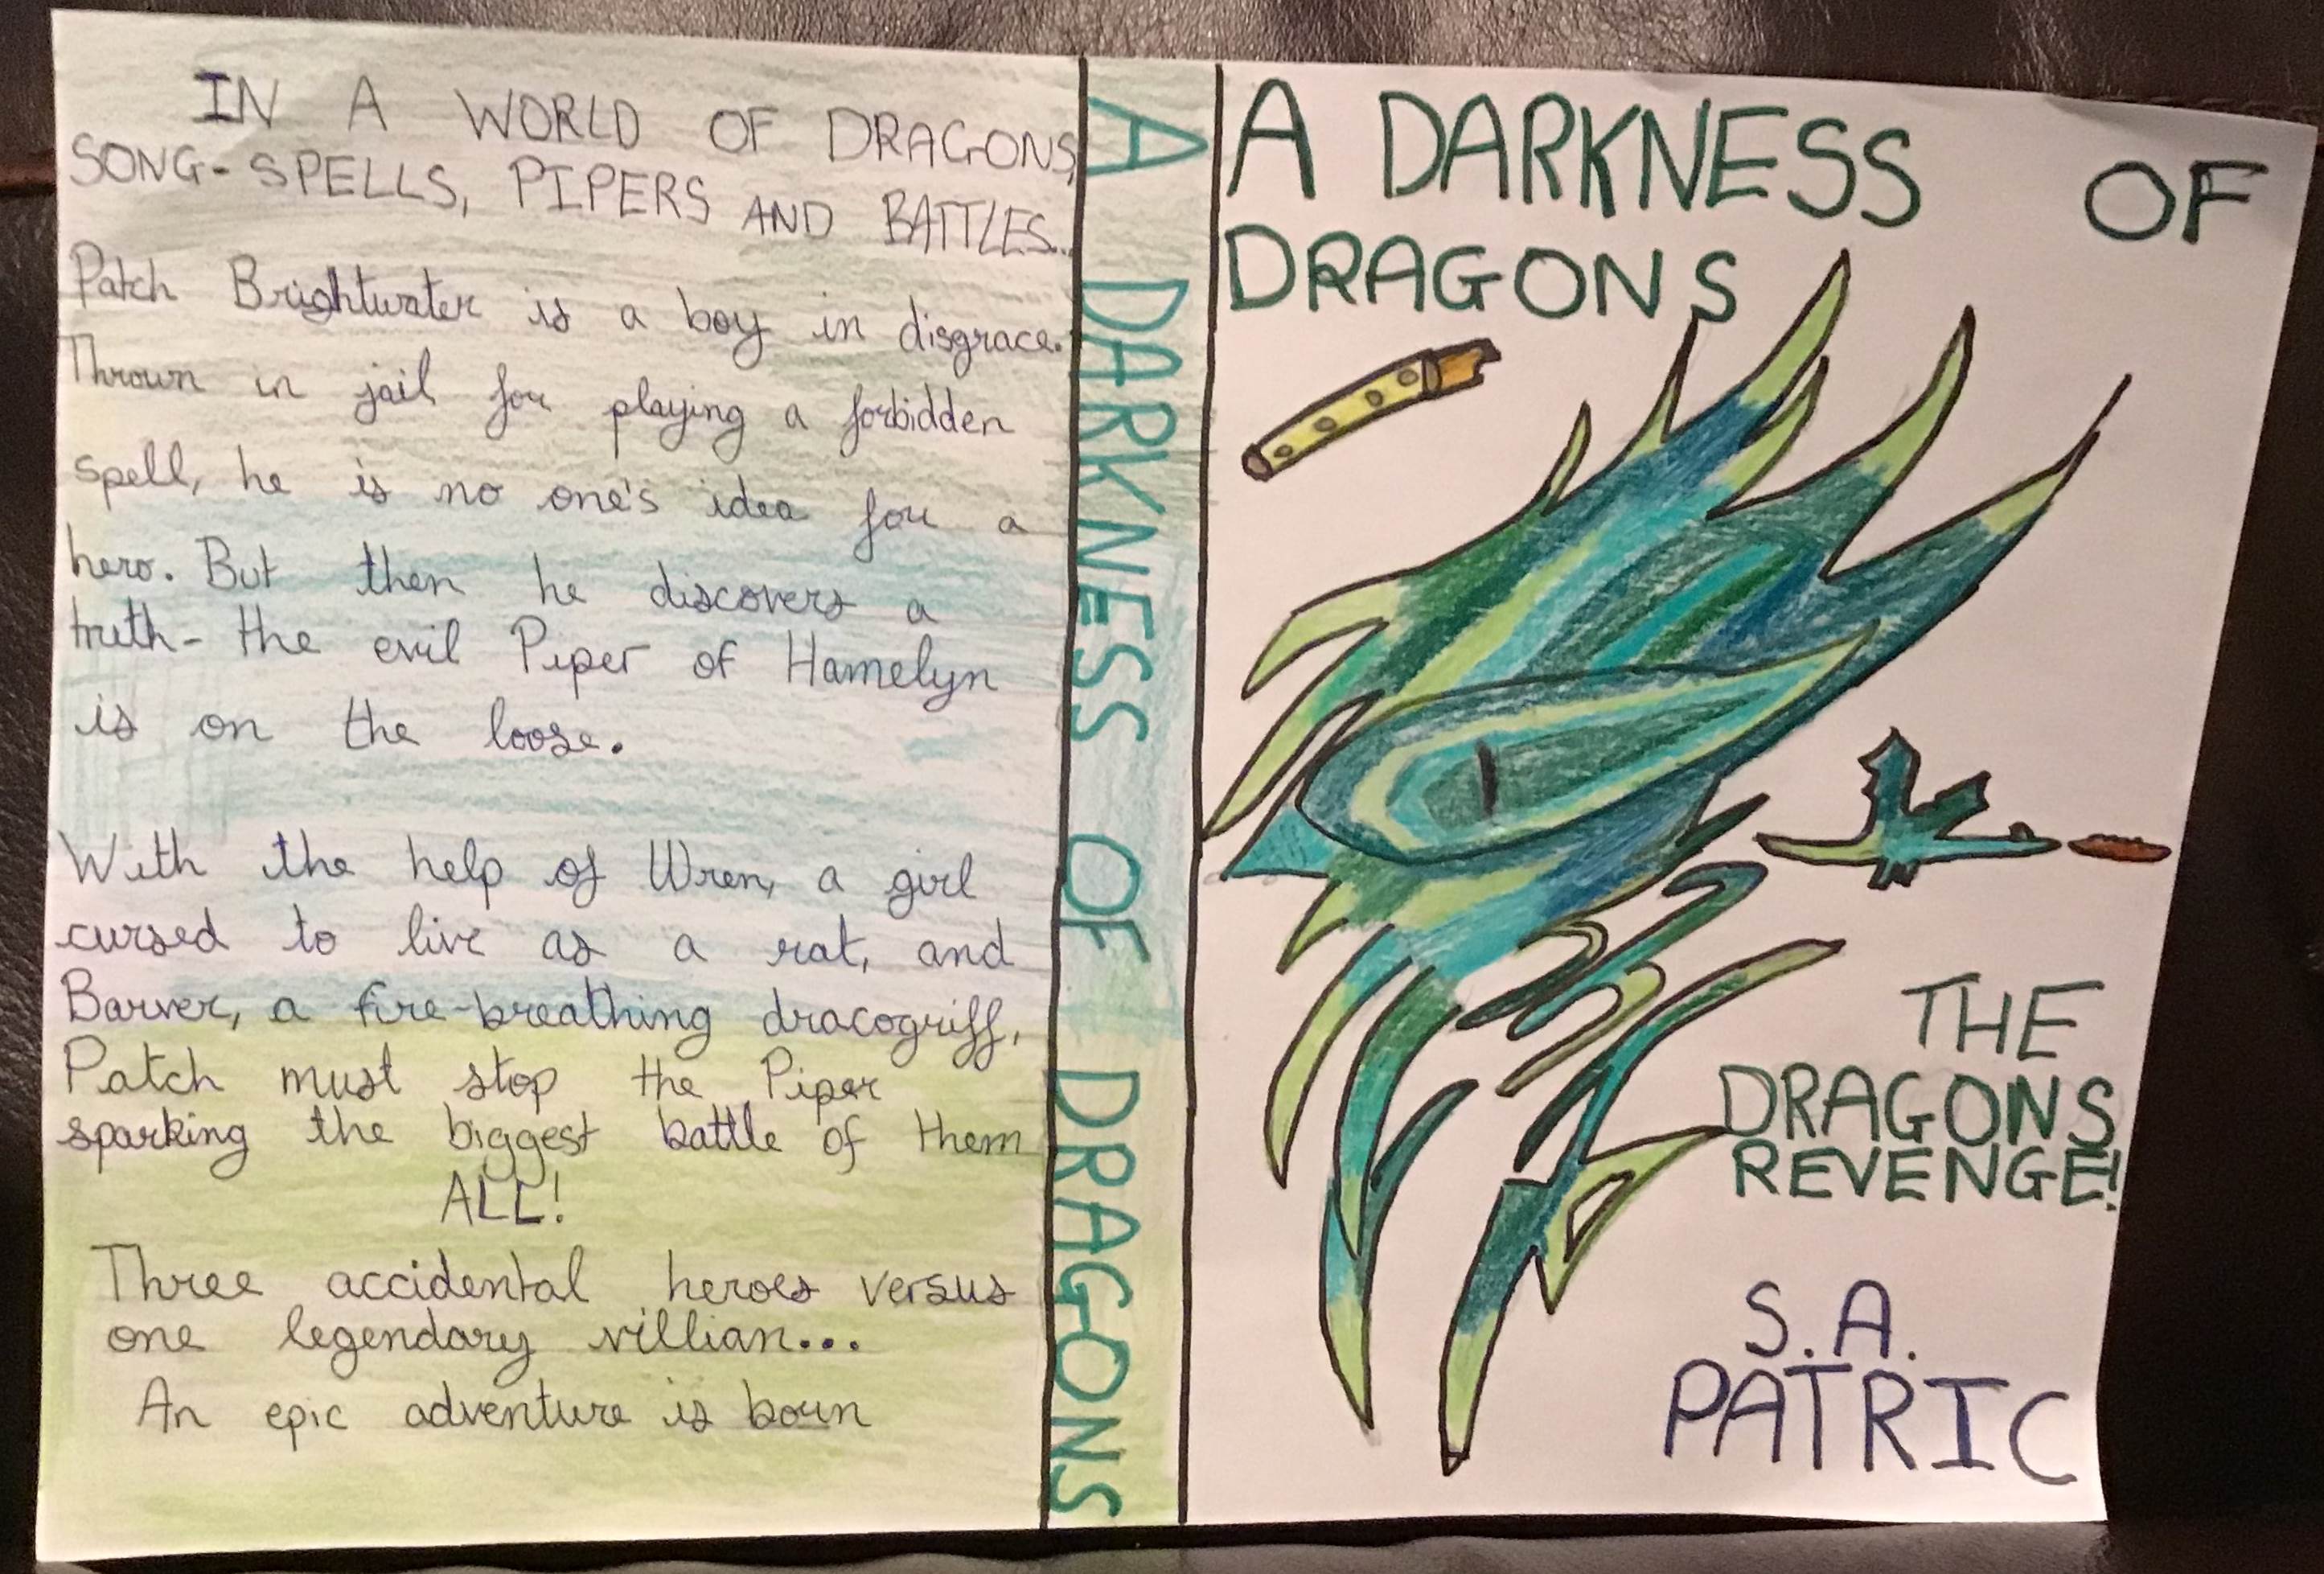 Runner up, Unknown, Claire's Court, A Darkness of Dragon